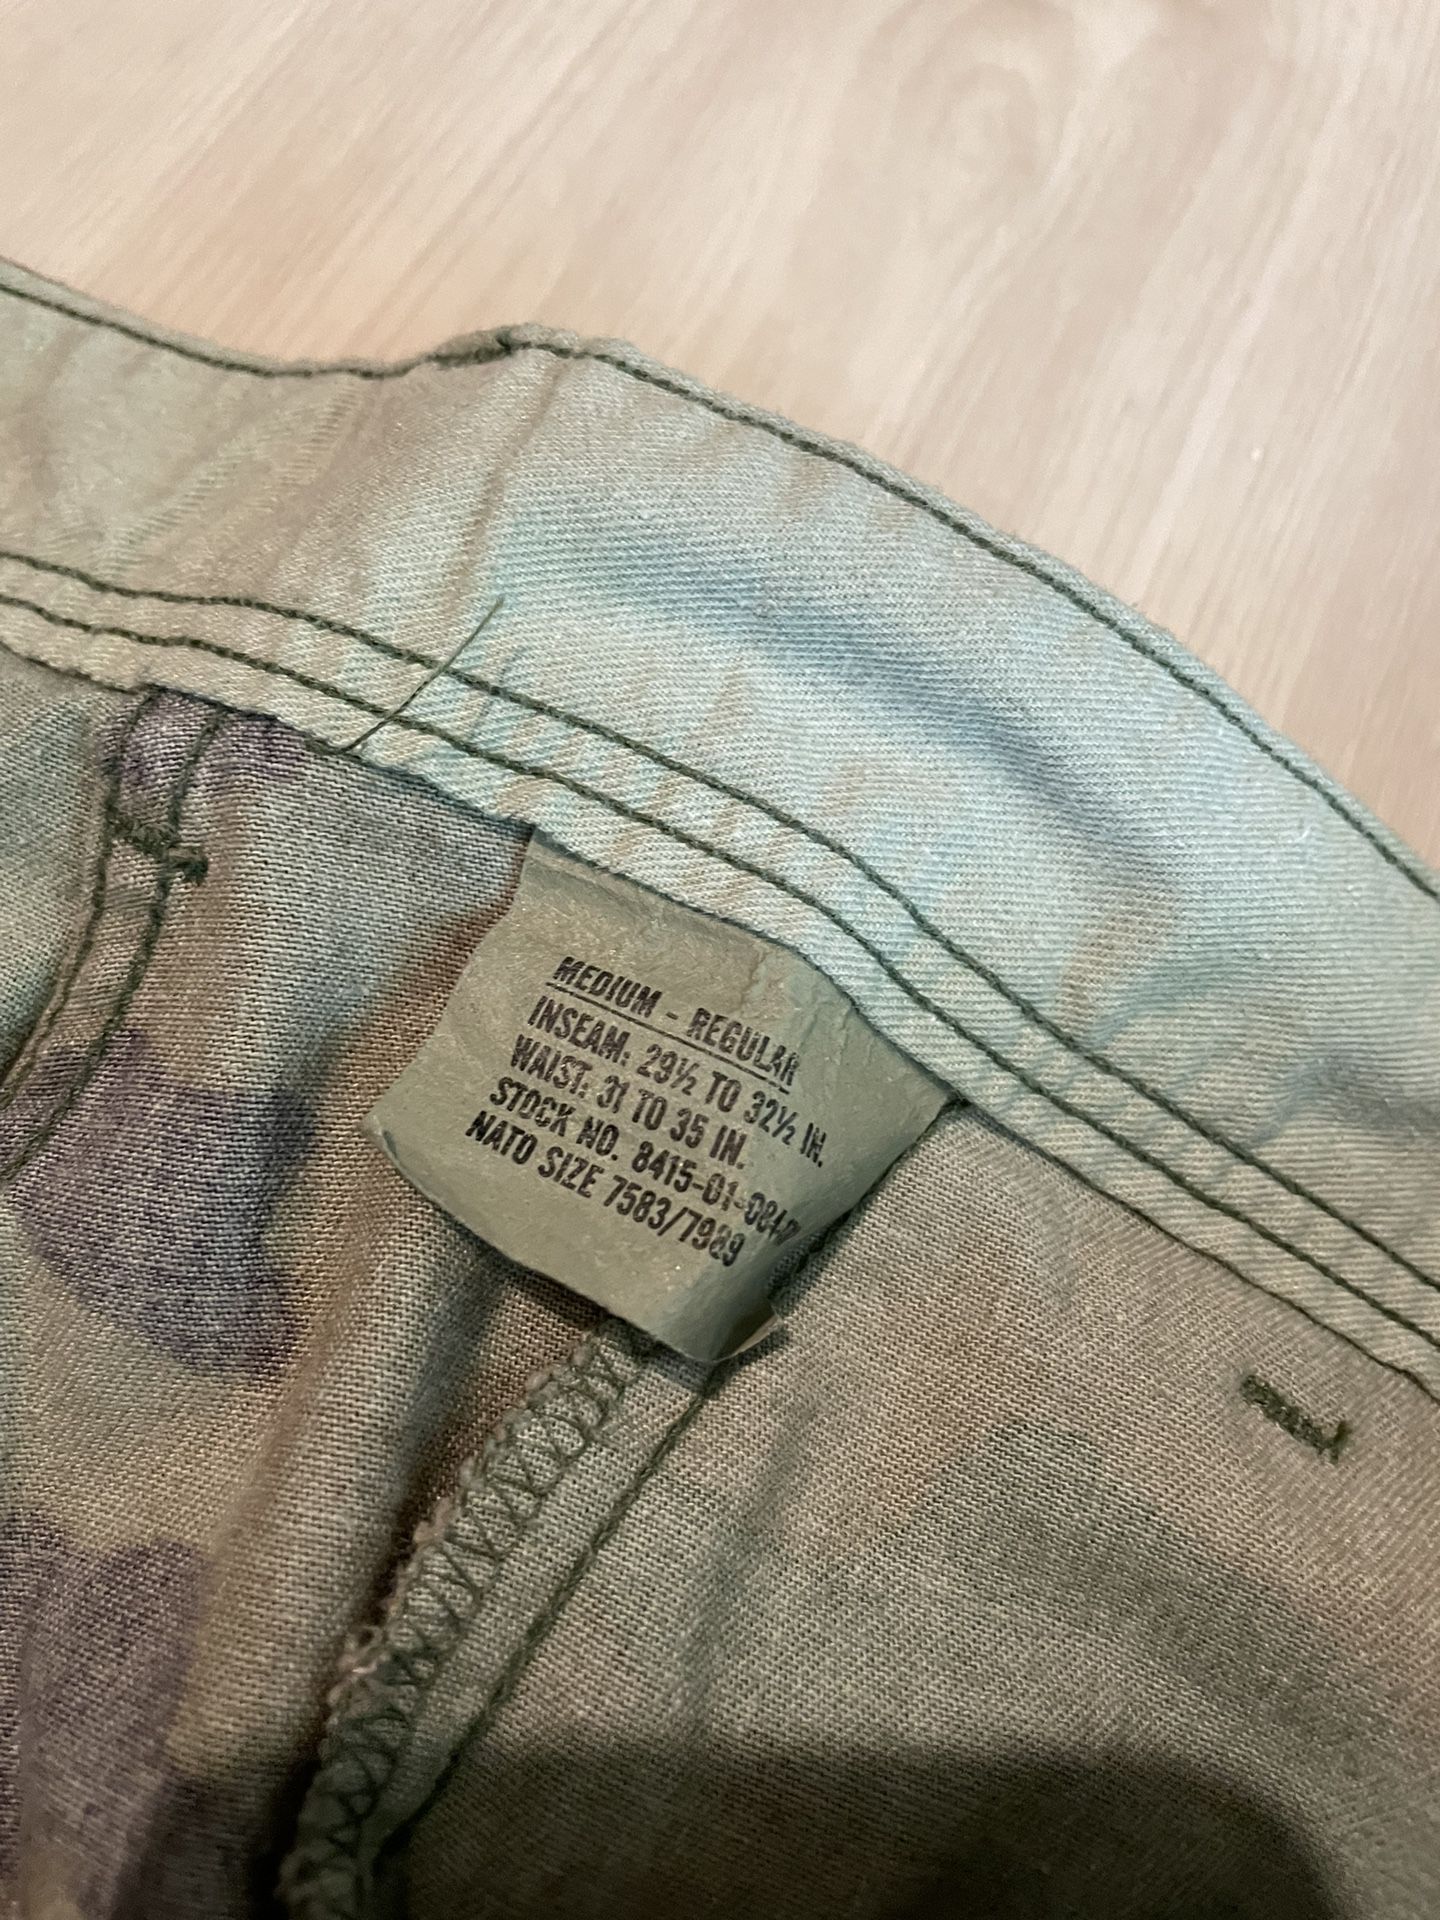 Vintage Army BDU 3-COLOR DESERT CAMO Cargo Combat Military Fatigue Pants  Med for Sale in Spring, TX - OfferUp